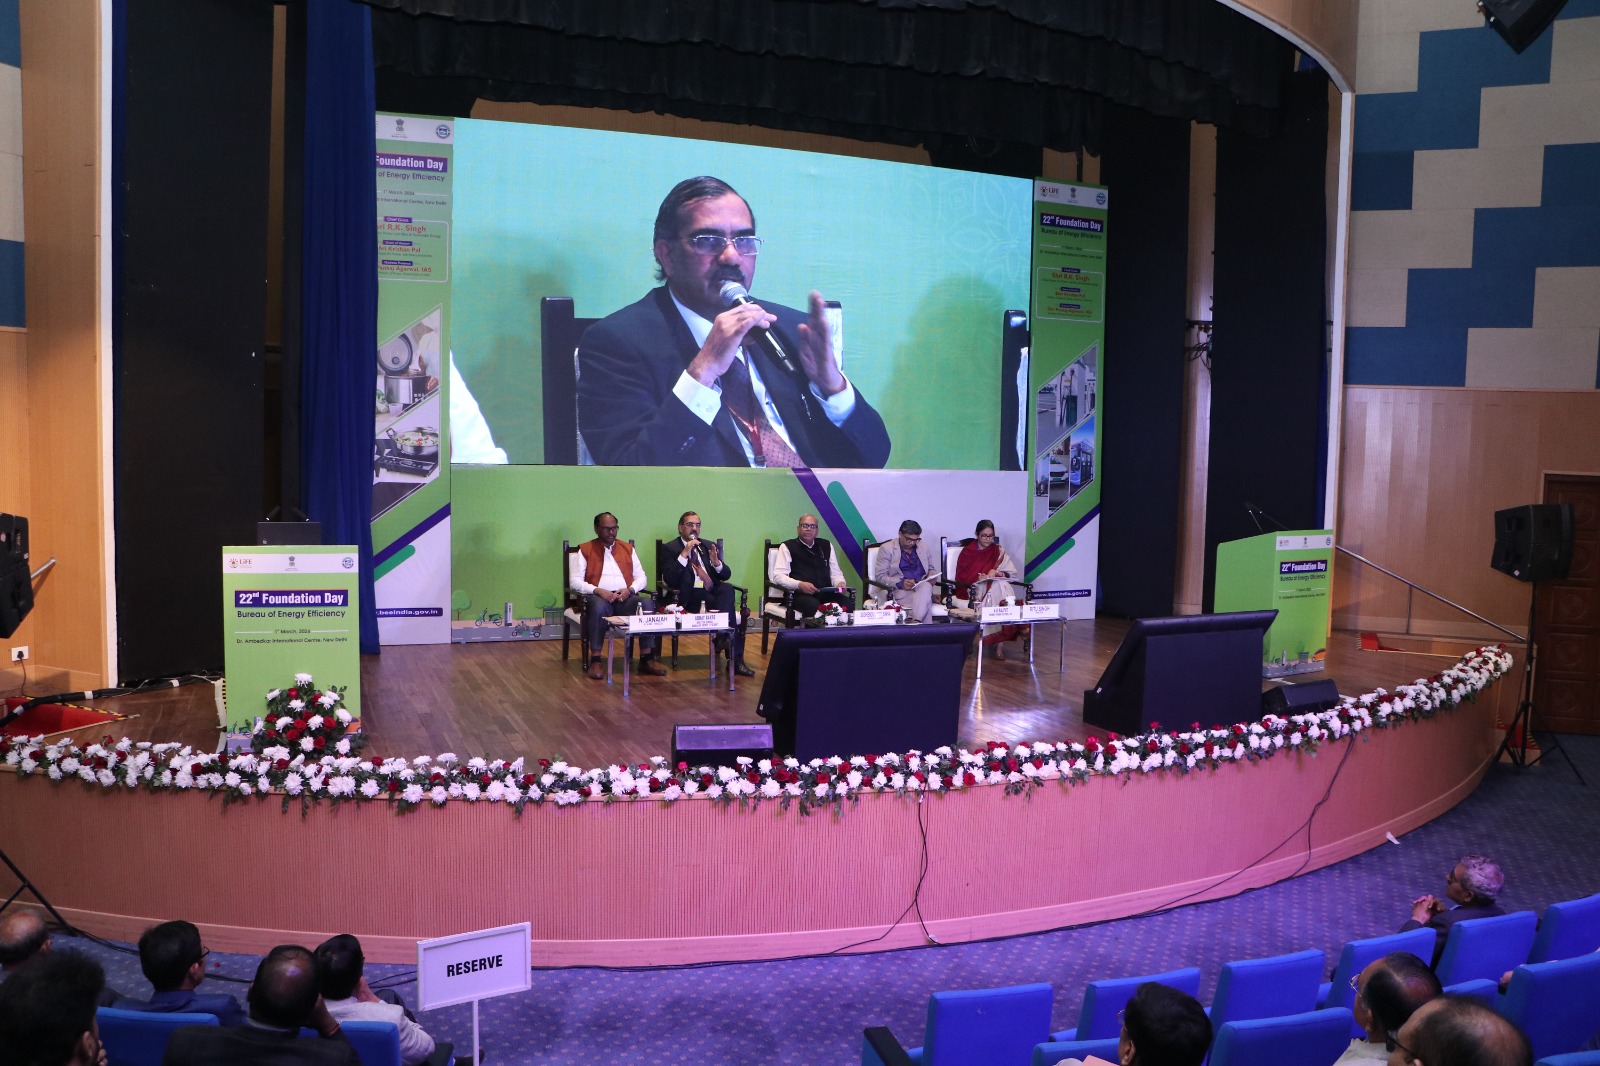 22nd Foundation Day Celebration of Bureau of Energy Efficiency deliberates on Role of e-Mobility in Energy Transition and Potential of Indian Carbon Market in Decarbonization